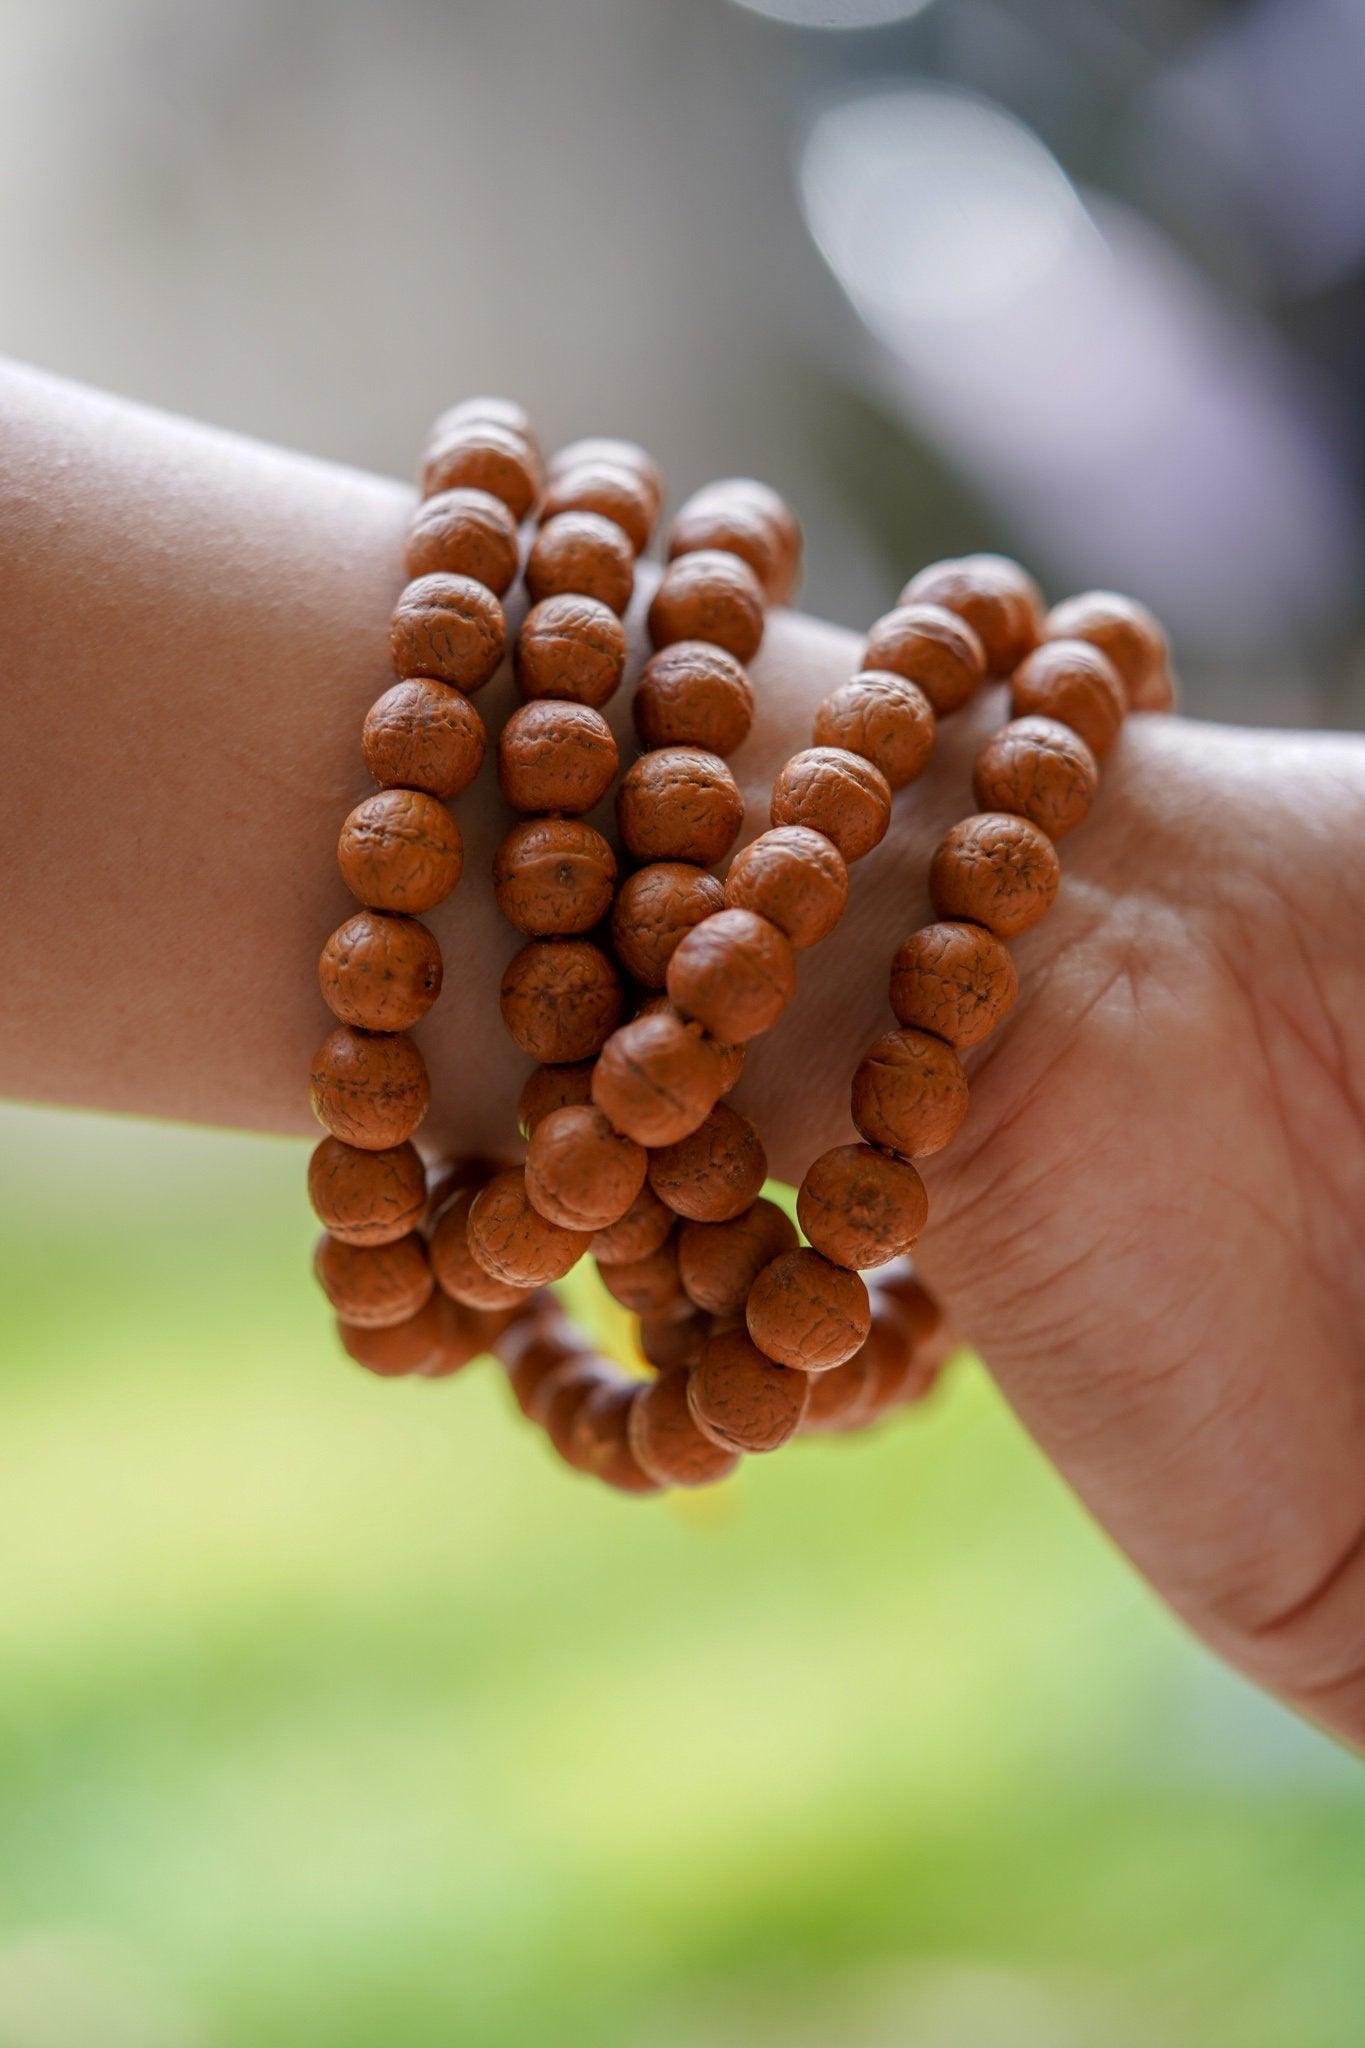 Enhance Your Meditation with the 12mm Bodhi Seeds Mala » Labex